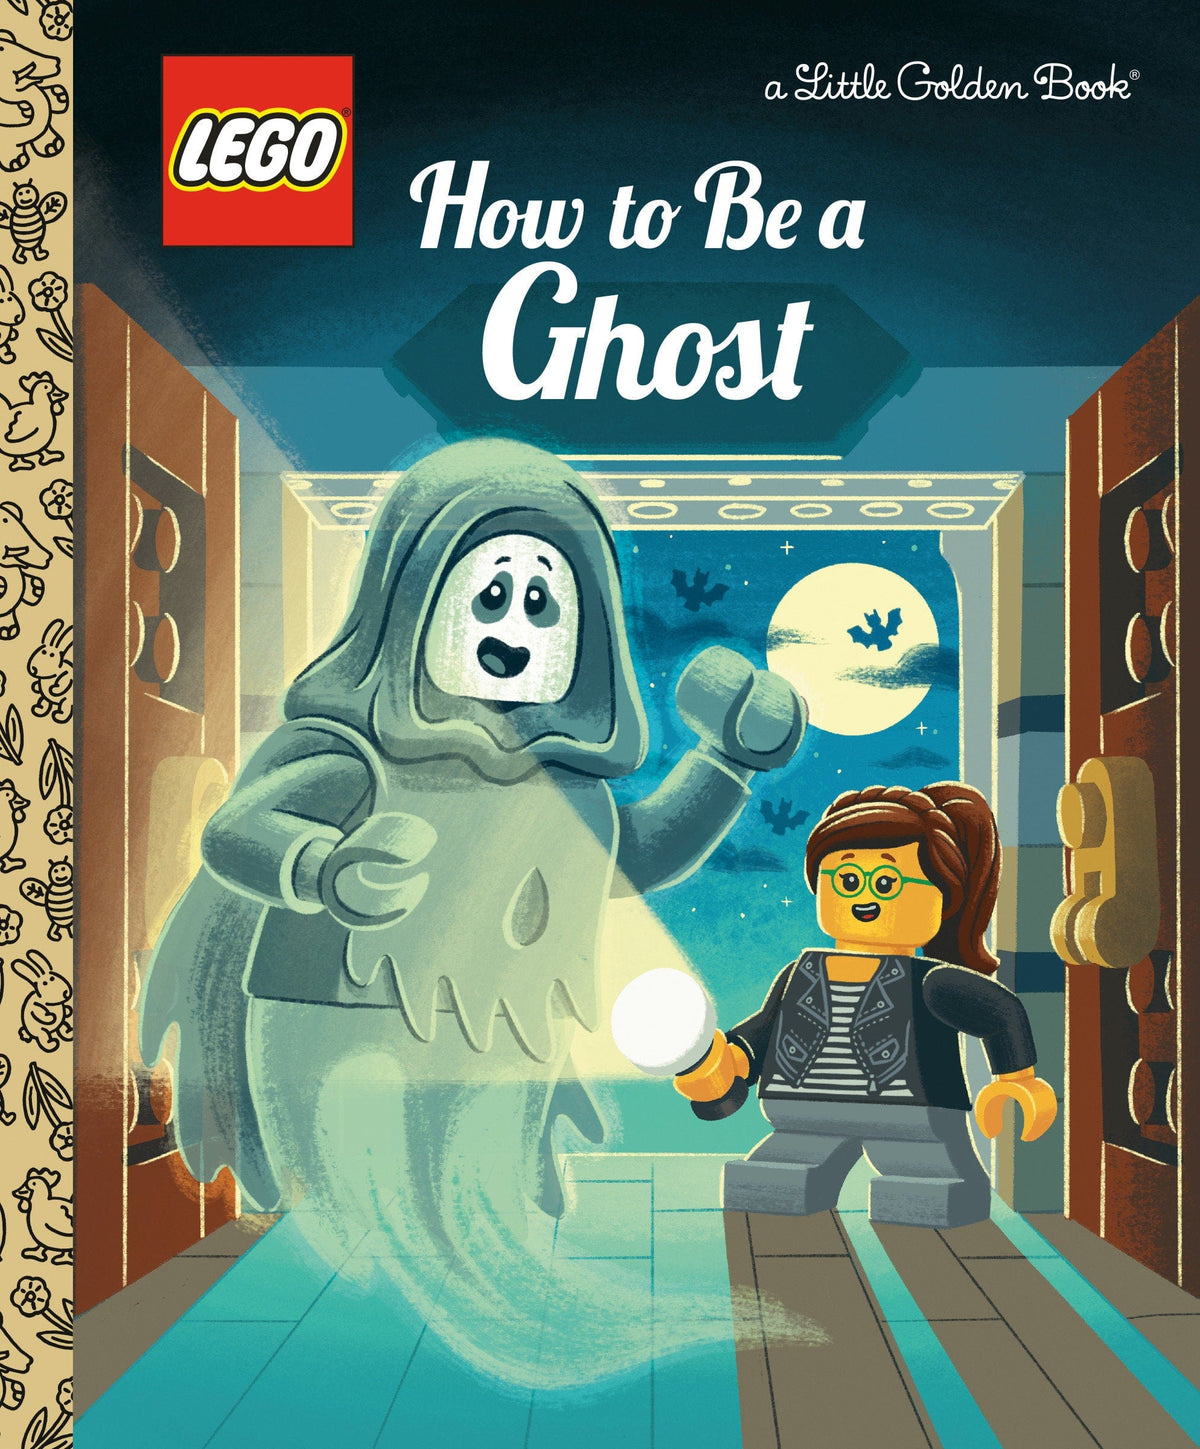 How to Be a Ghost (LEGO) Hardcover